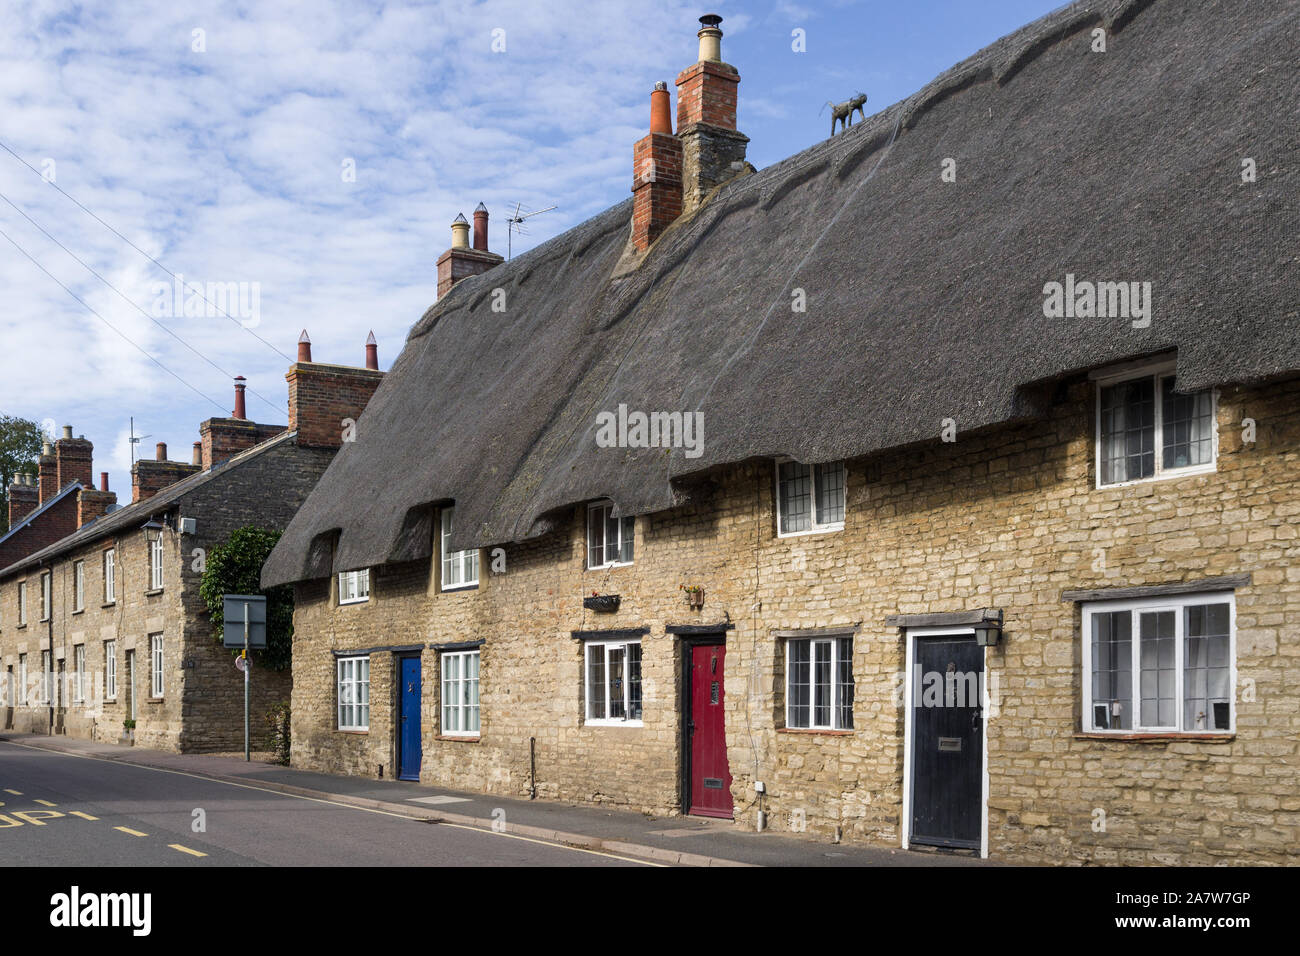 Terrace of old stone built thatched cottages in the village of Sharnbrook, Bedfordshire, UK Stock Photo